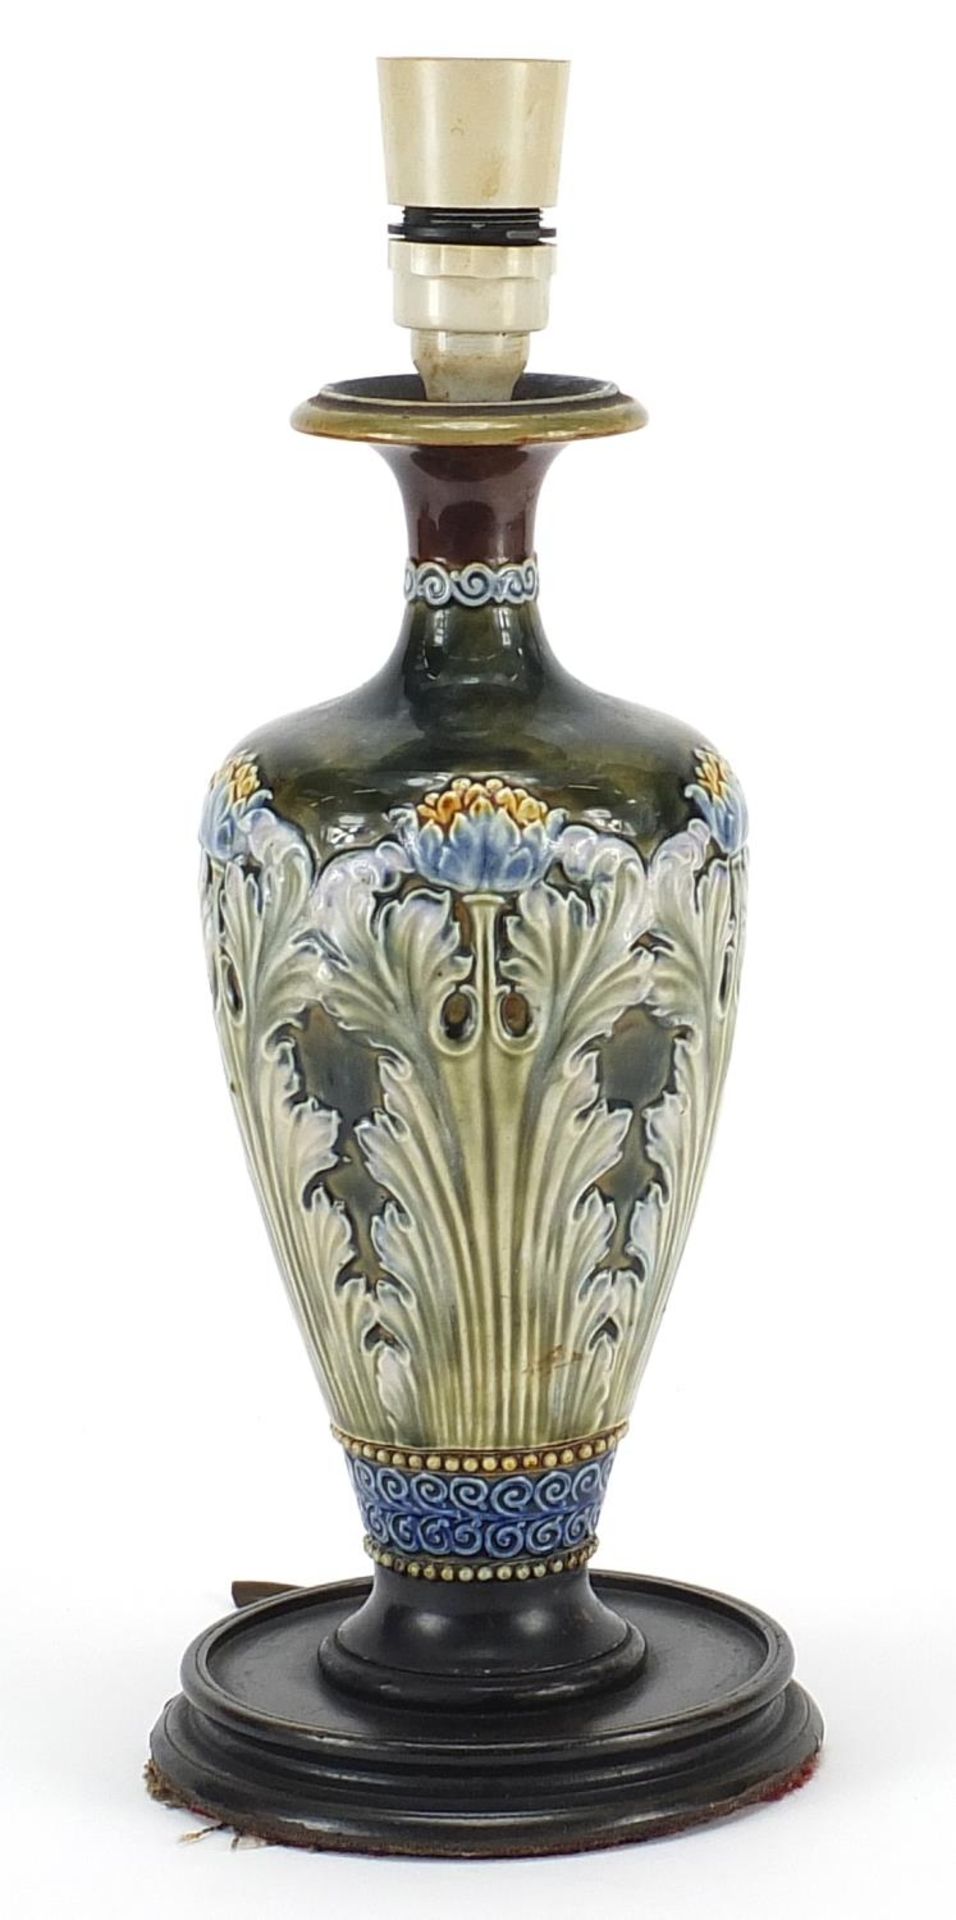 Royal Doulton, Art Nouveau stoneware vase lamp hand painted with flowers, 34.5cm high : For